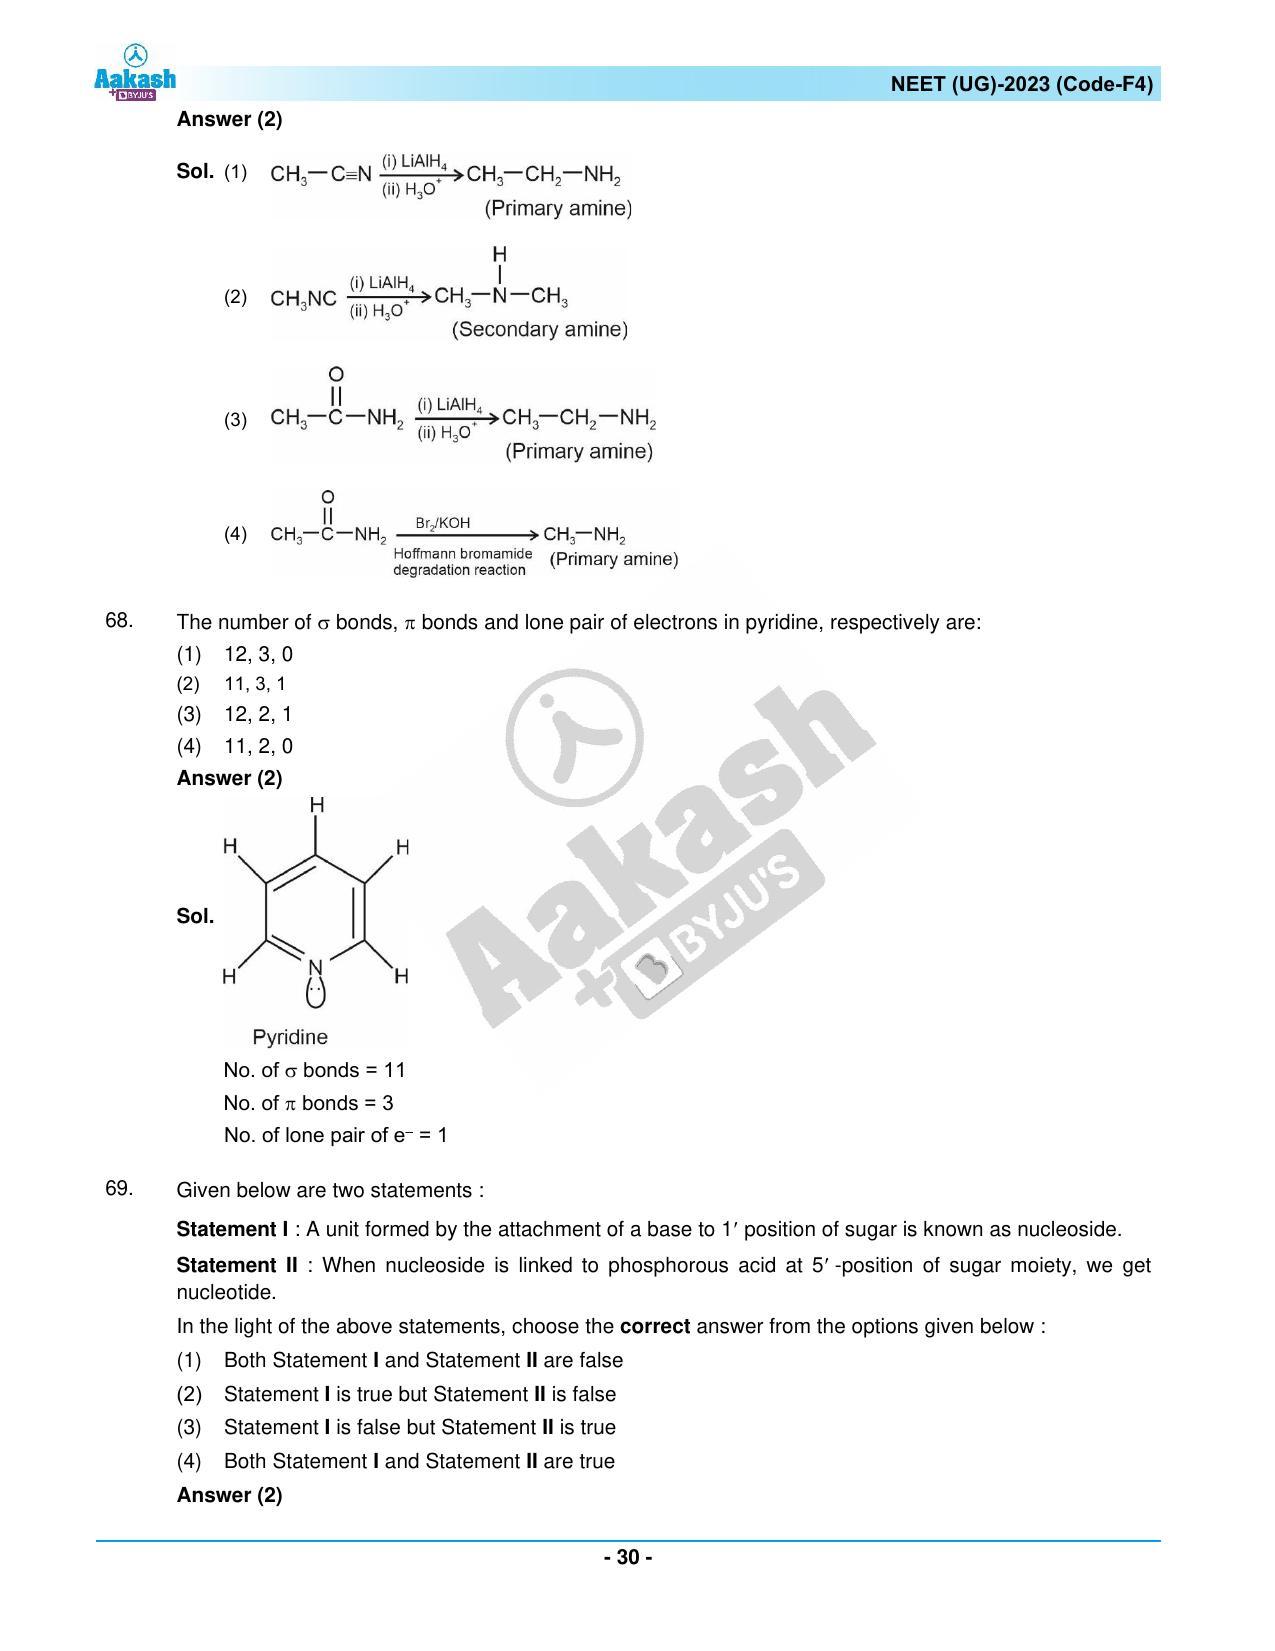 NEET 2023 Question Paper F4 - Page 30